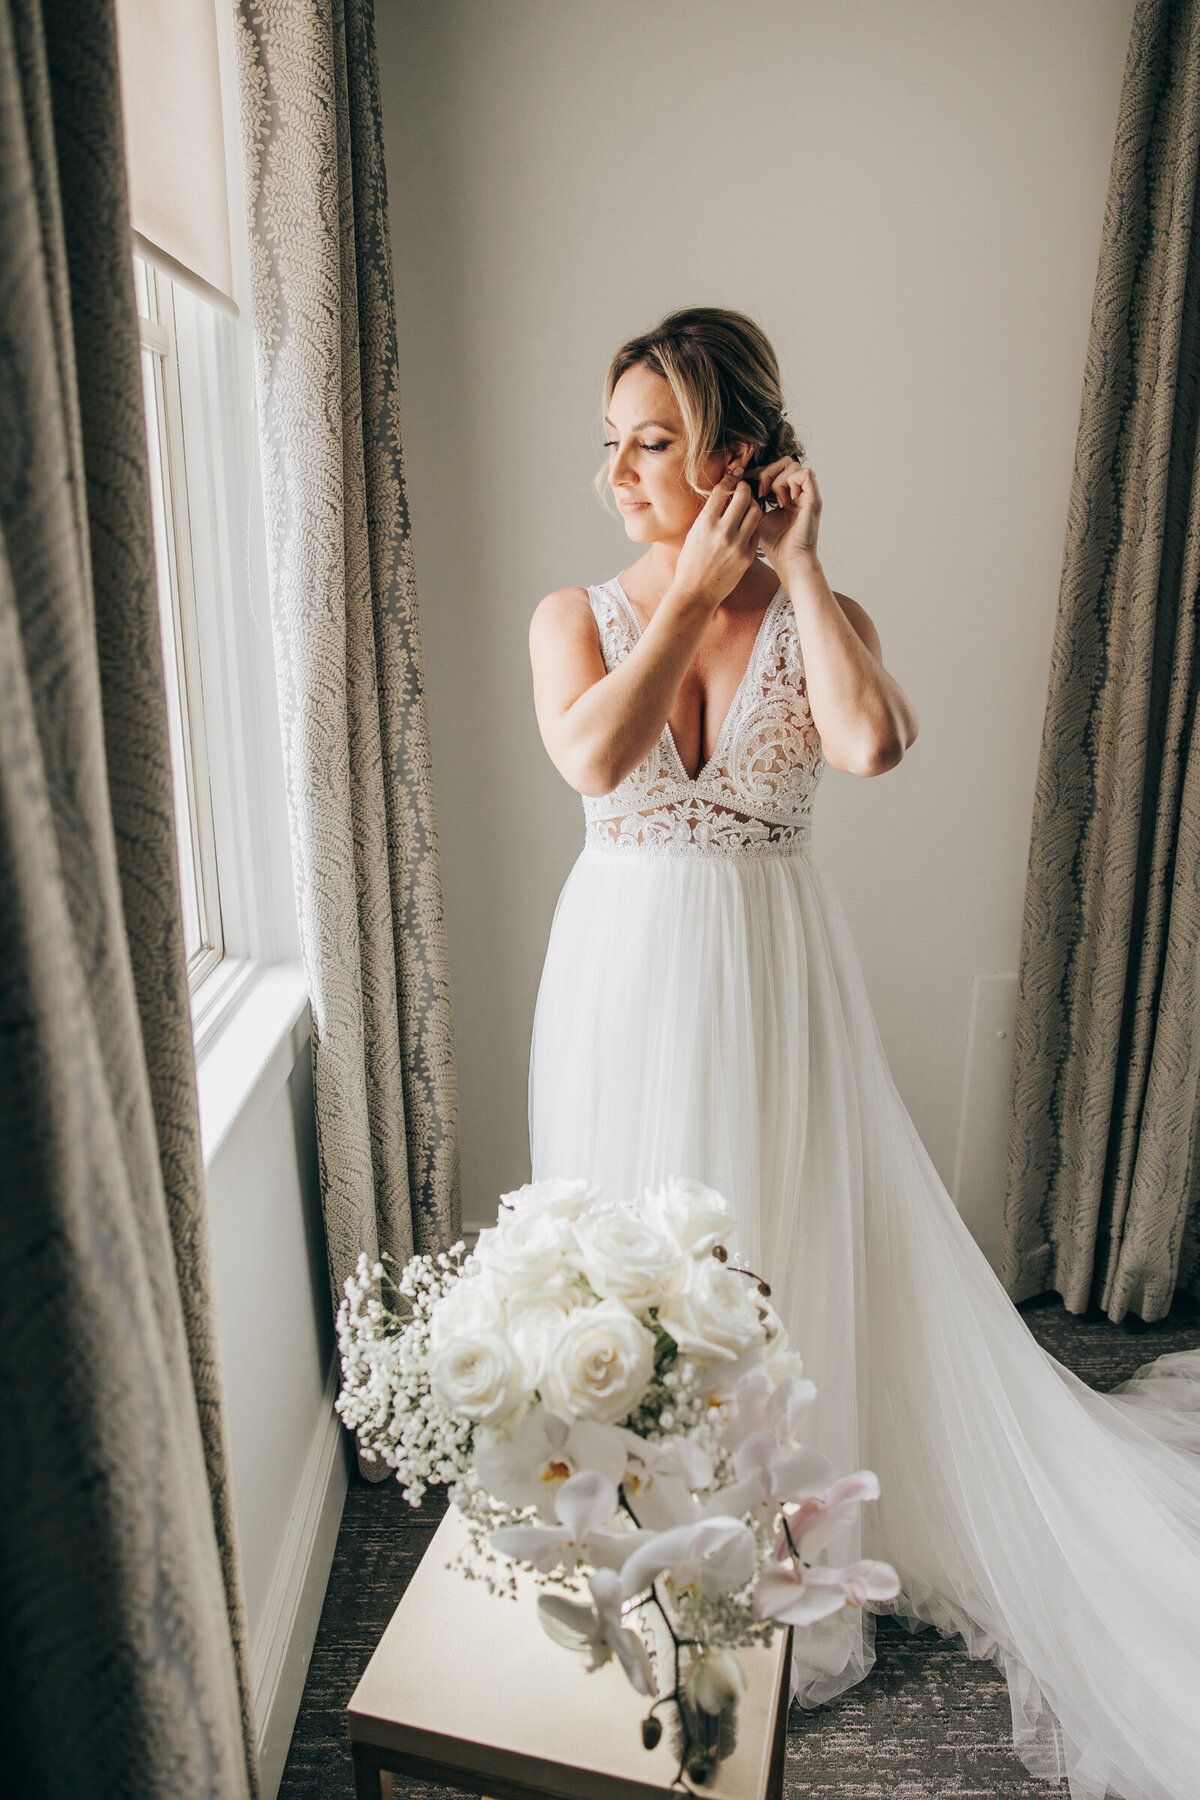 A bride putting on earrings while looking out a window